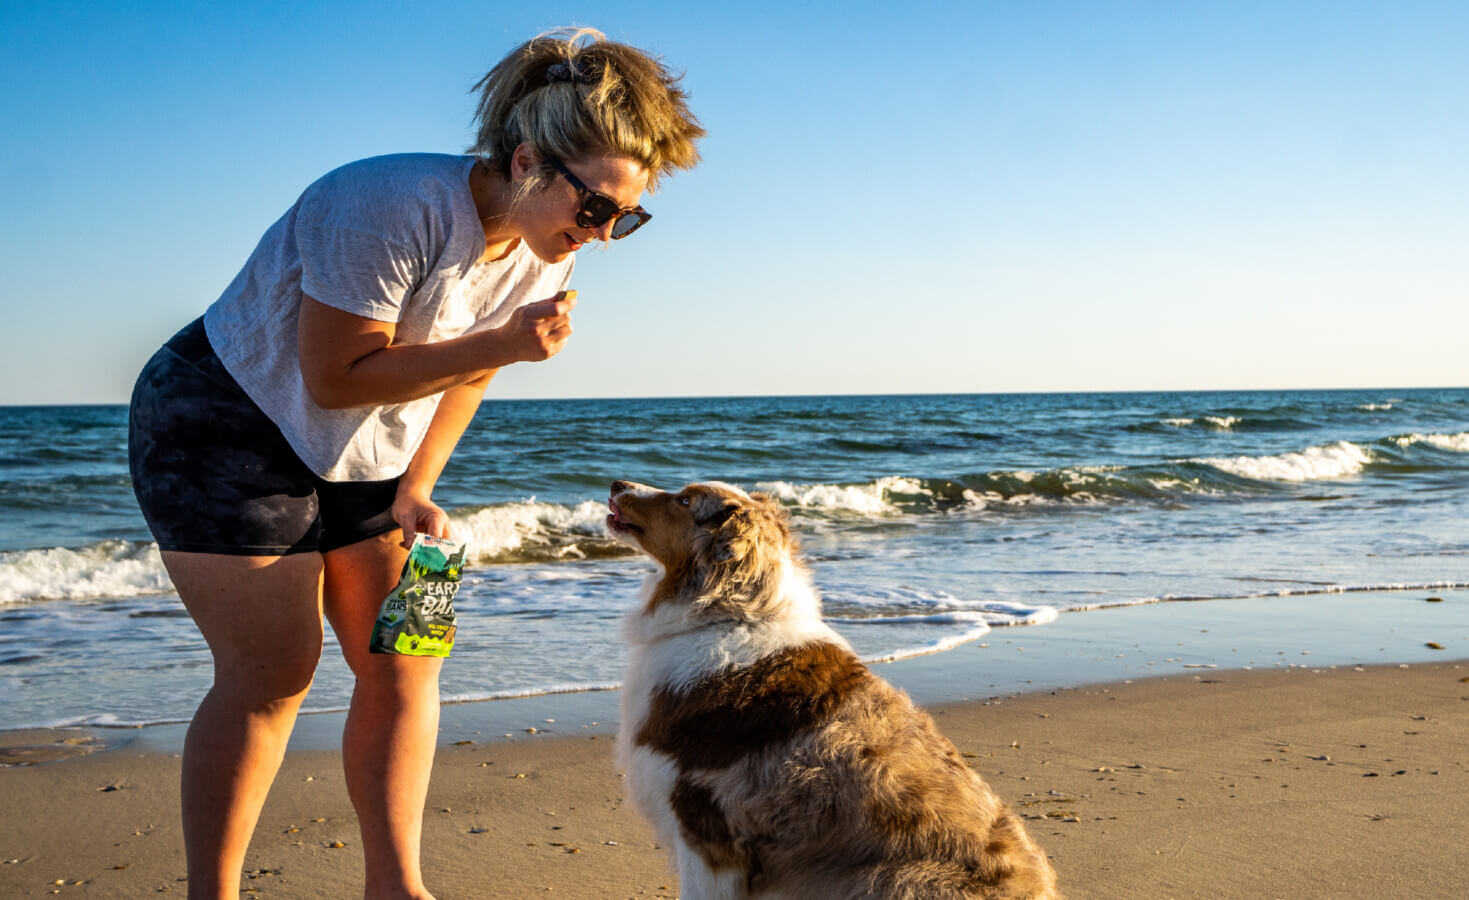 Person stands on beach holding treat while dog sits in front of them